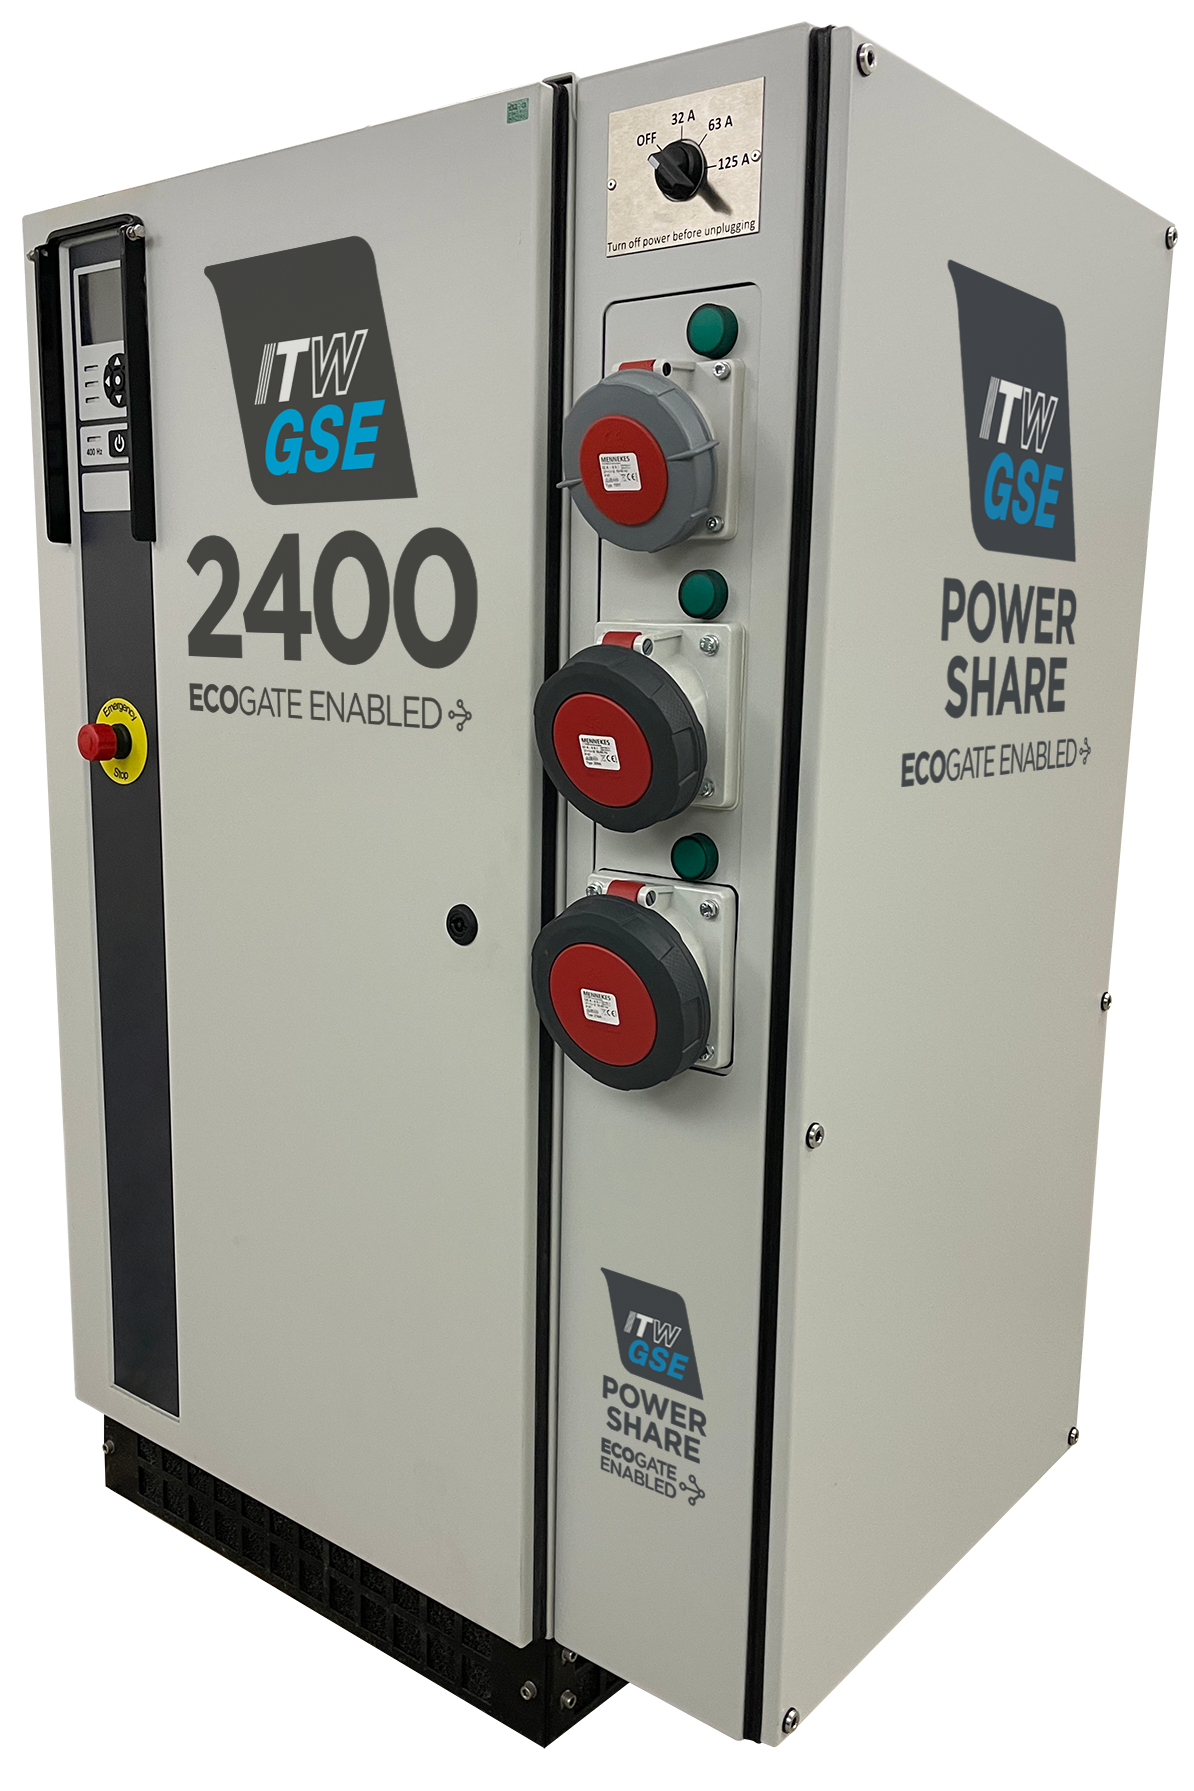 2400 compact with power share